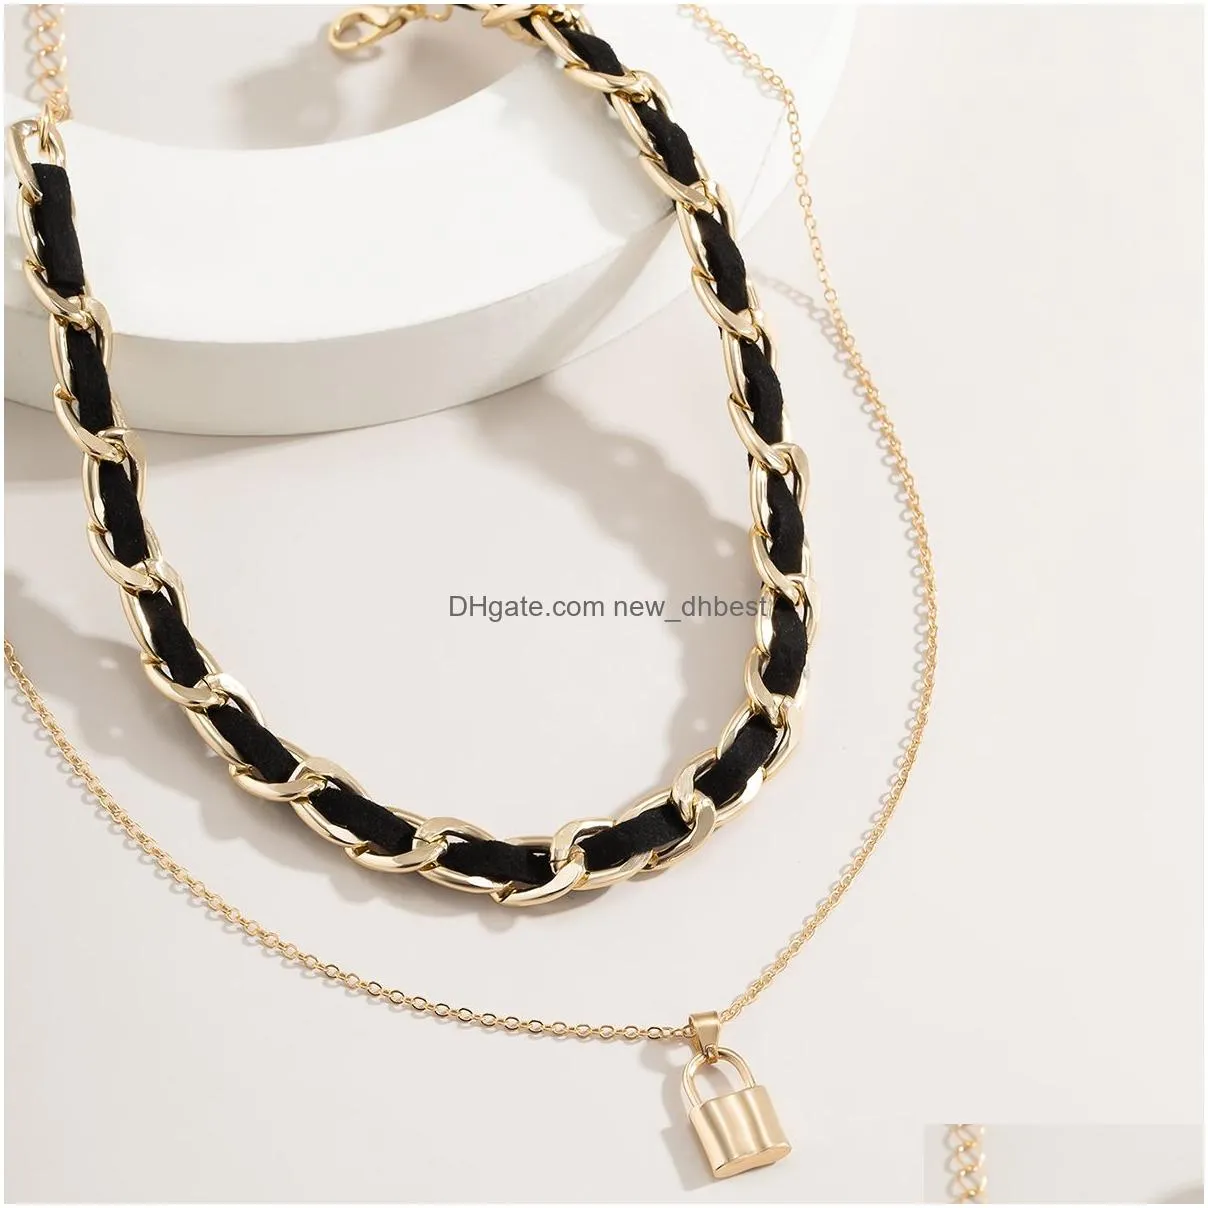 gold chains lock pendant necklace lace multi layer wrap choker necklaces women fashion jewelry will and sandy gift